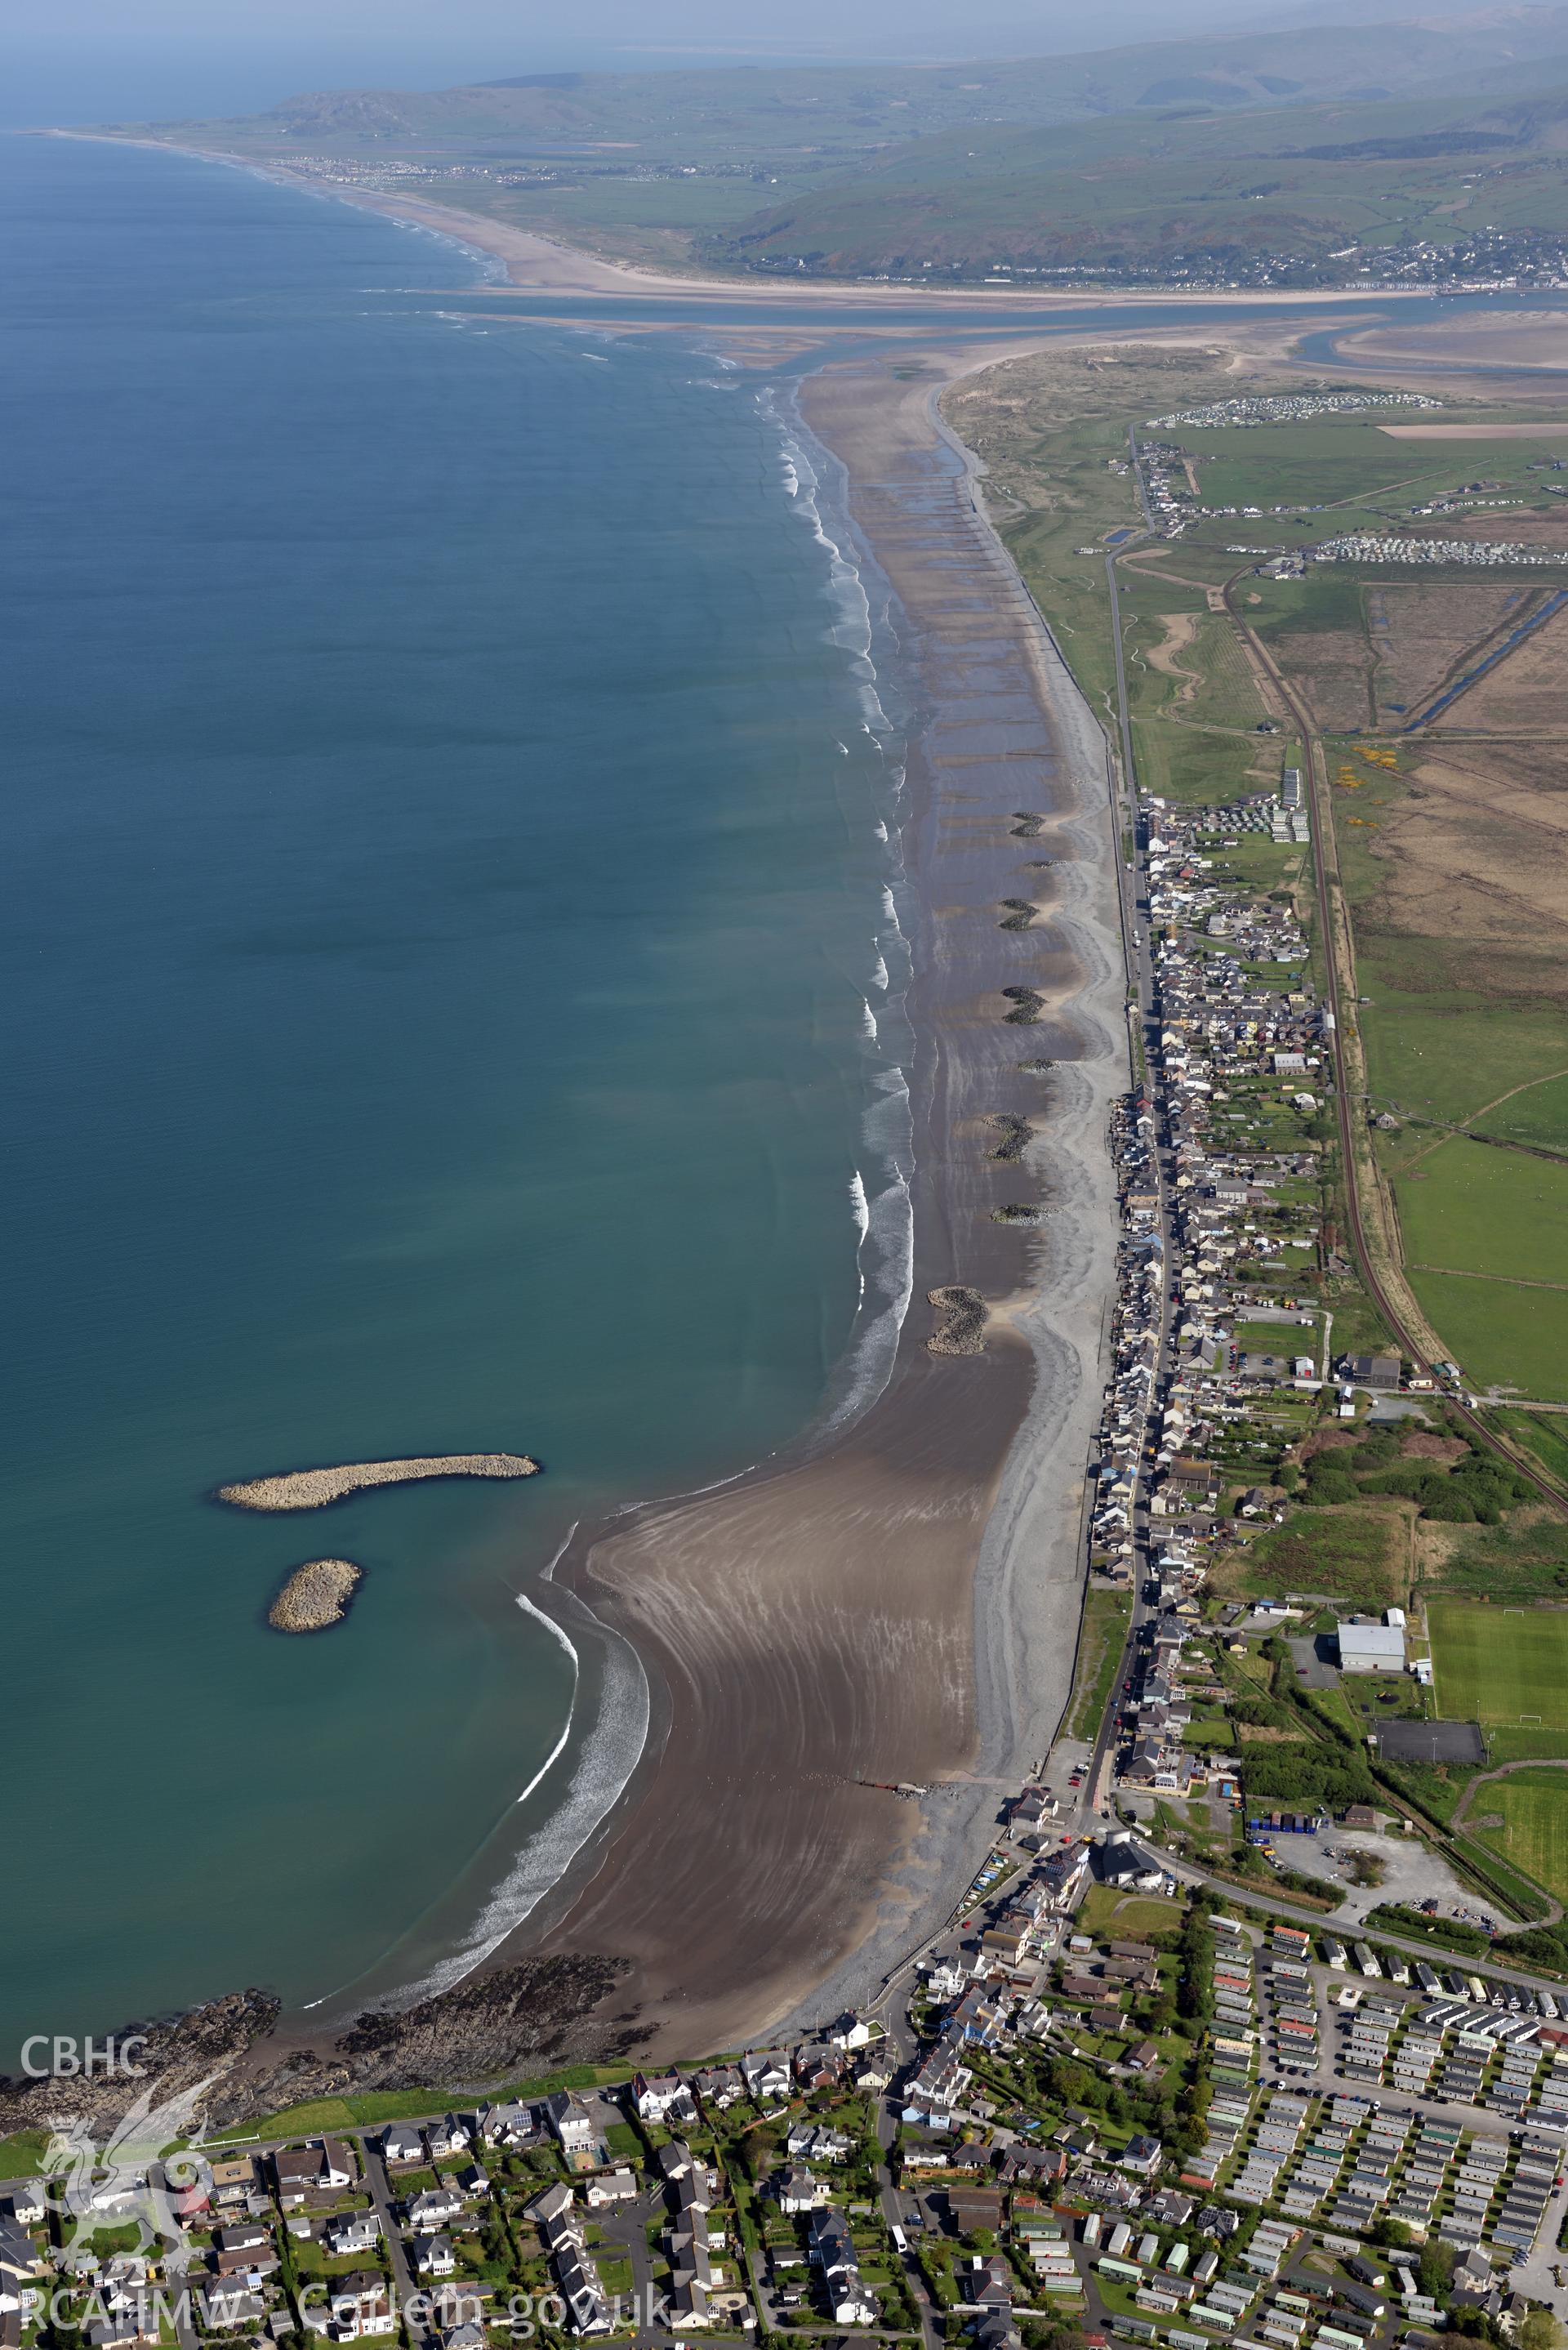 Aerial photography of Borth taken on 3rd May 2017.  Baseline aerial reconnaissance survey for the CHERISH Project. ? Crown: CHERISH PROJECT 2017. Produced with EU funds through the Ireland Wales Co-operation Programme 2014-2020. All material made freely